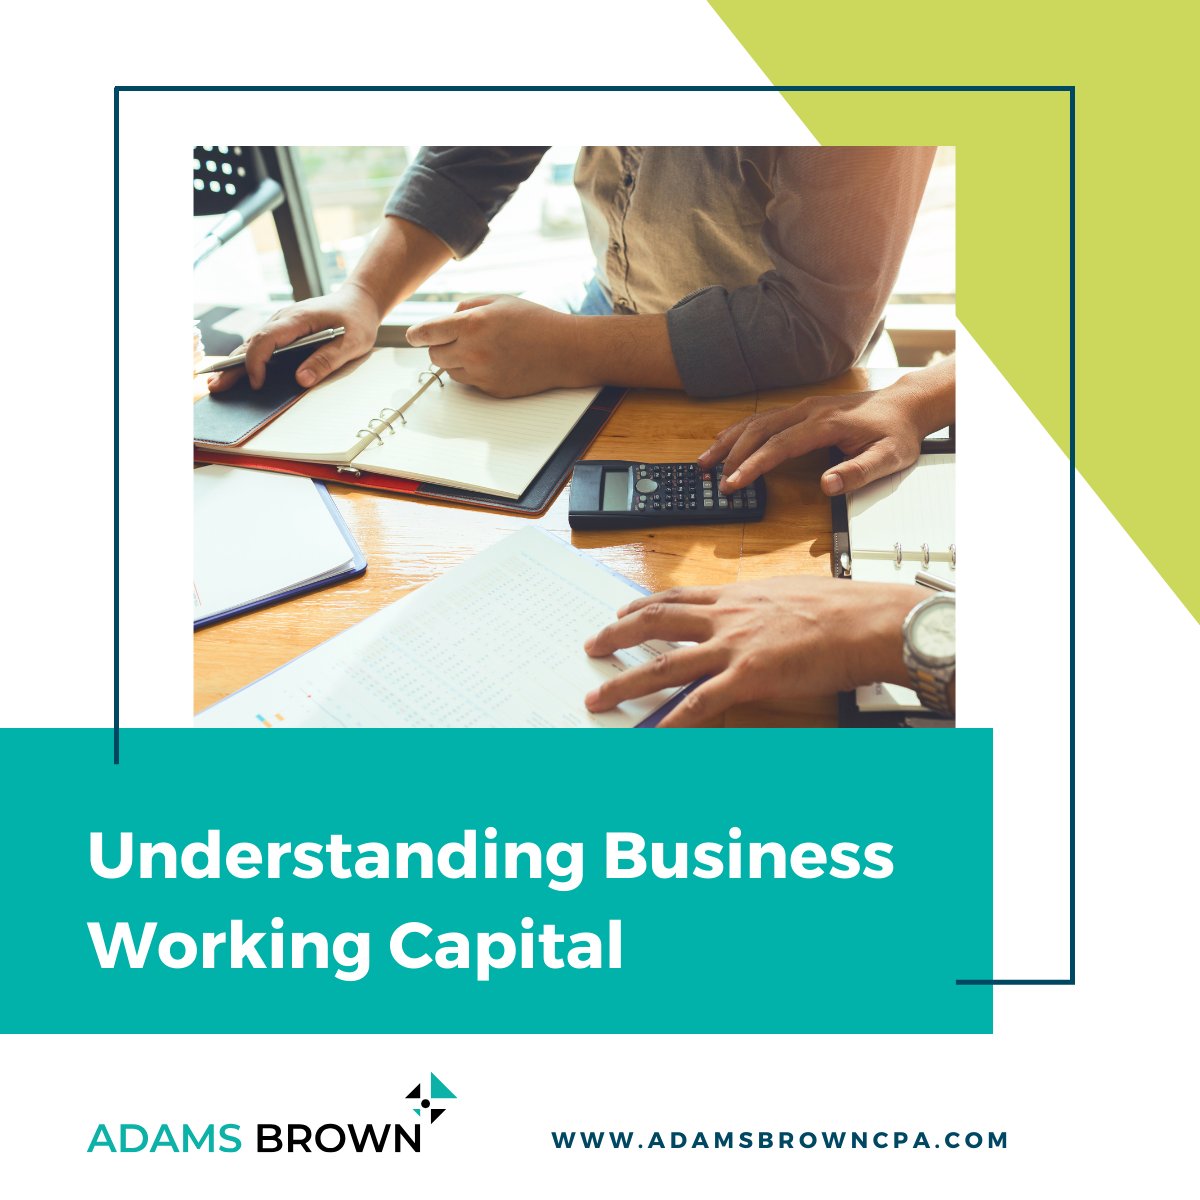 As working capital is dependent on a business’ complete operating cycle, it is crucial to regularly and consistently review and analyze this metric. 

Read more: hubs.la/Q02sPh770

#workingcapital #businesscapital #businessowner #financialstrategy